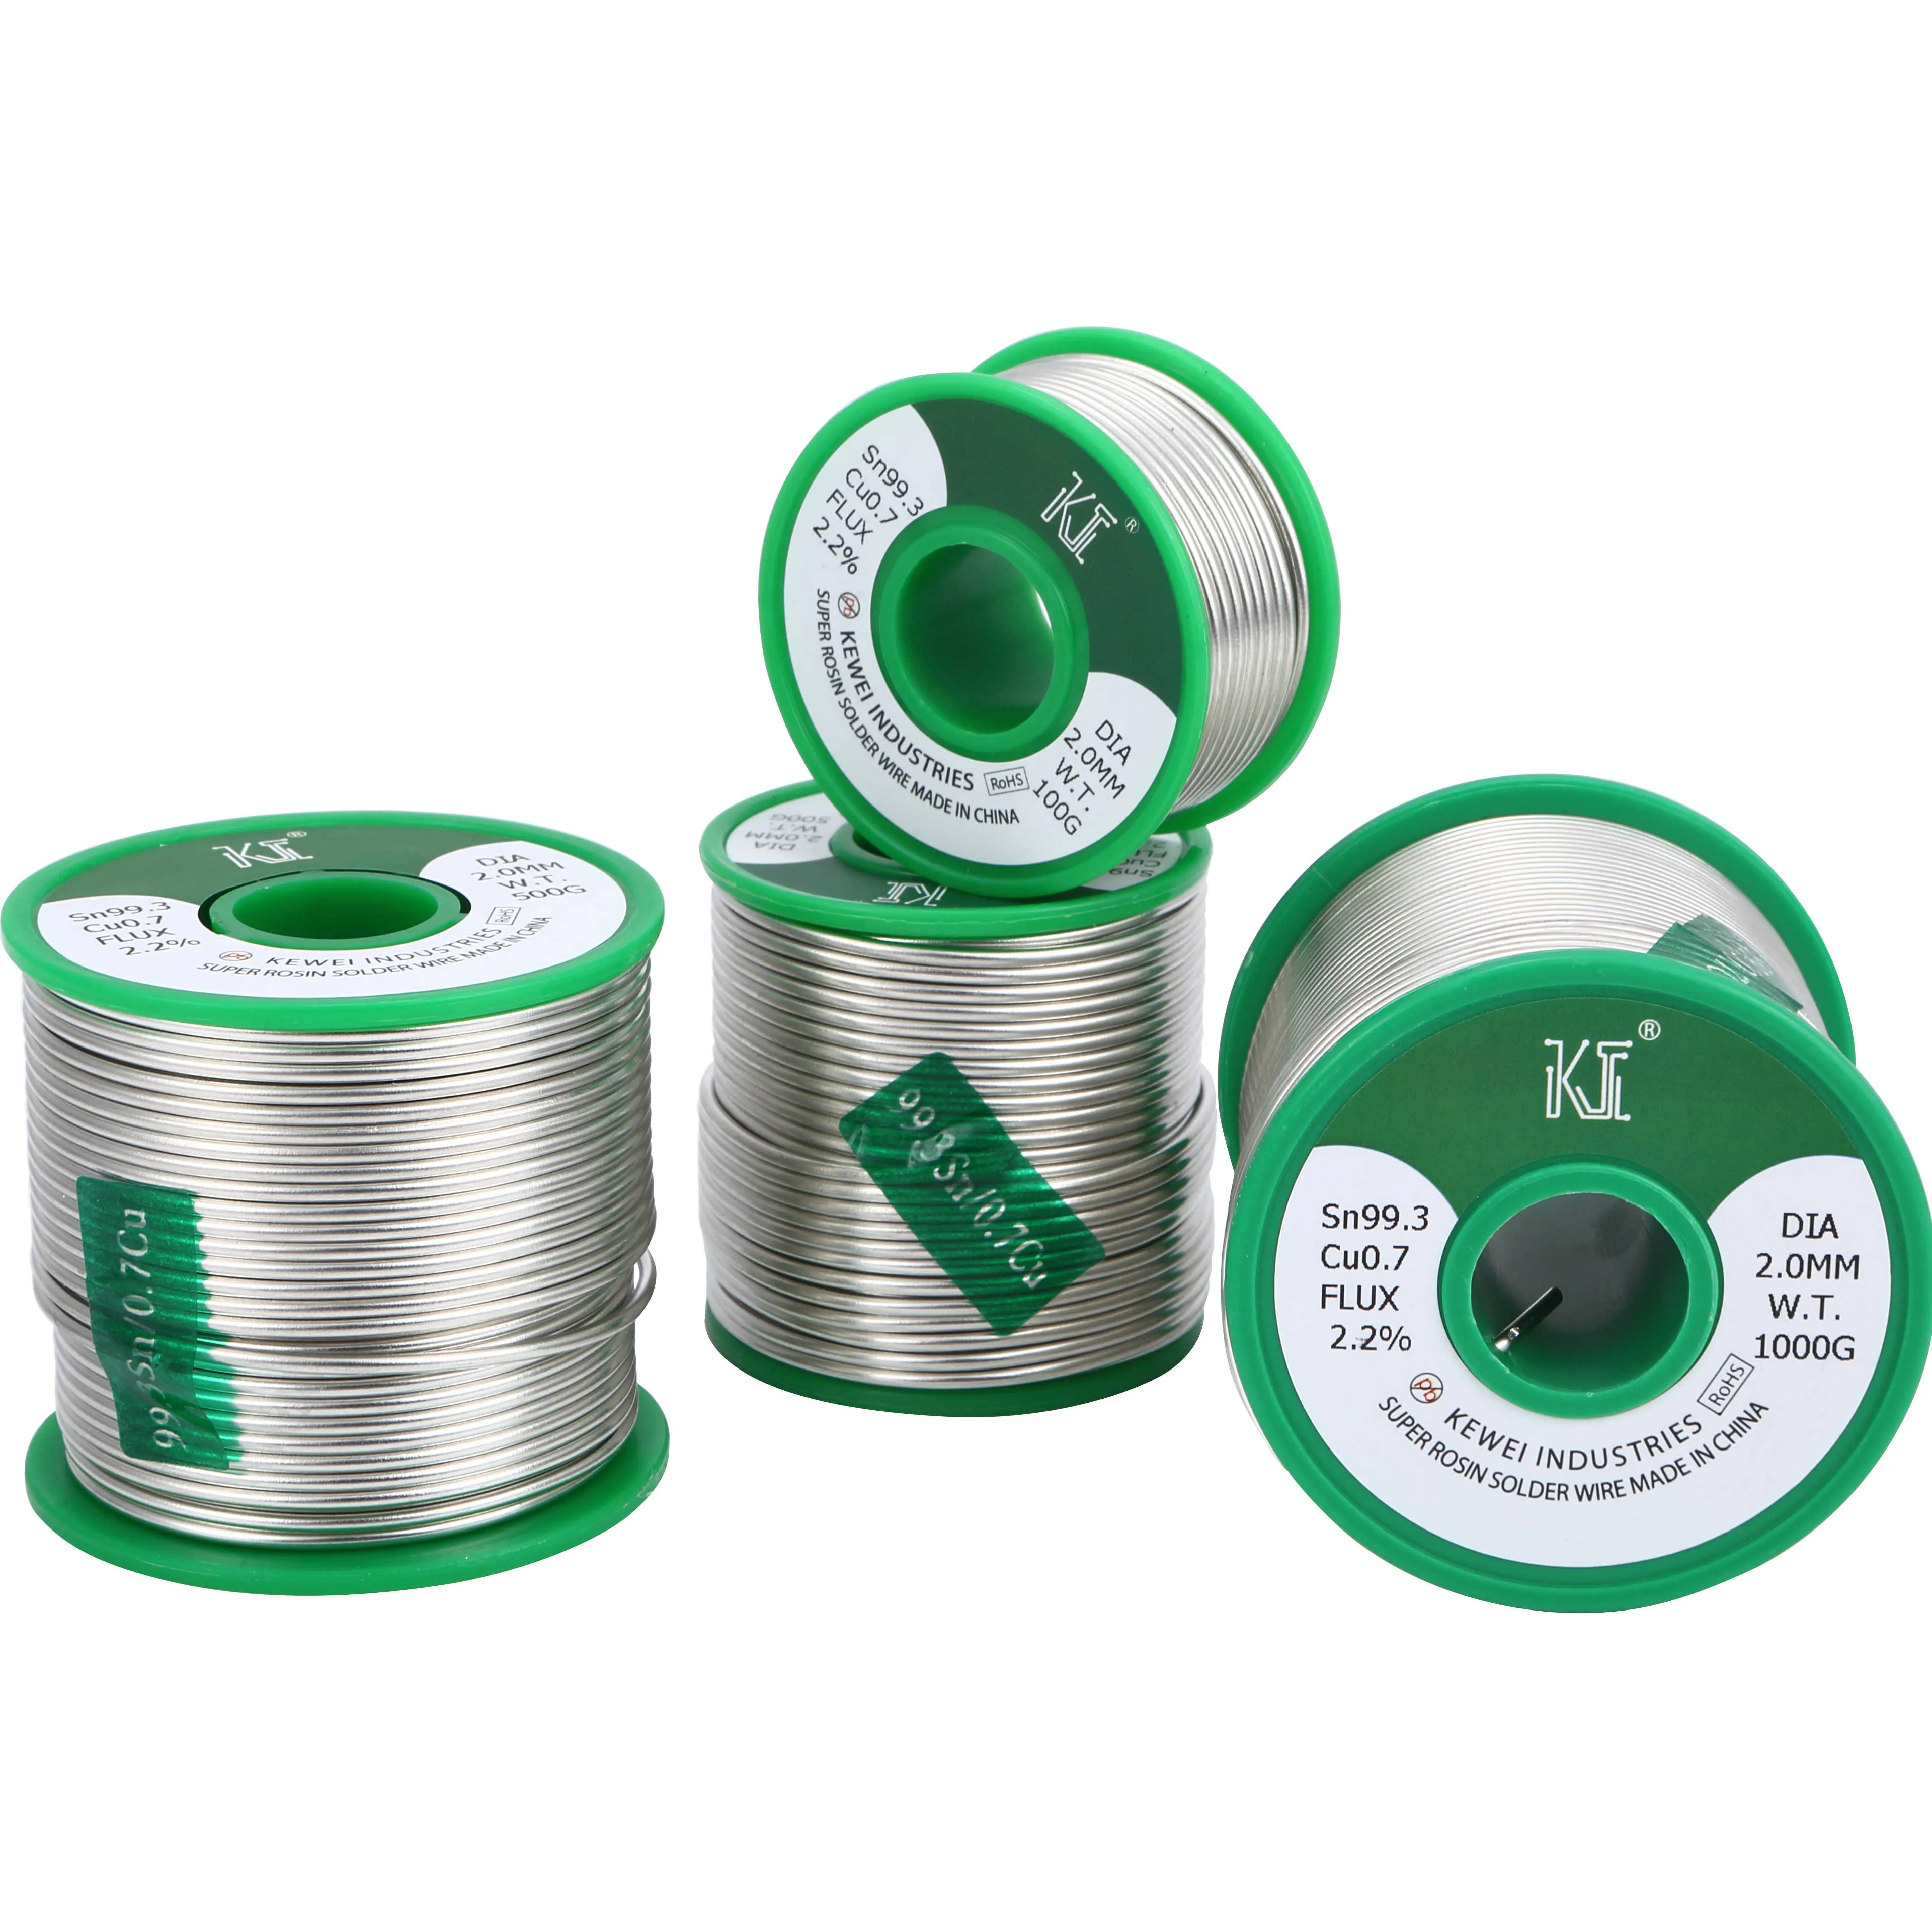 Lead free solder wire Sn96Ag4 250g 0.5mm high temperature for jewelry accessory welding